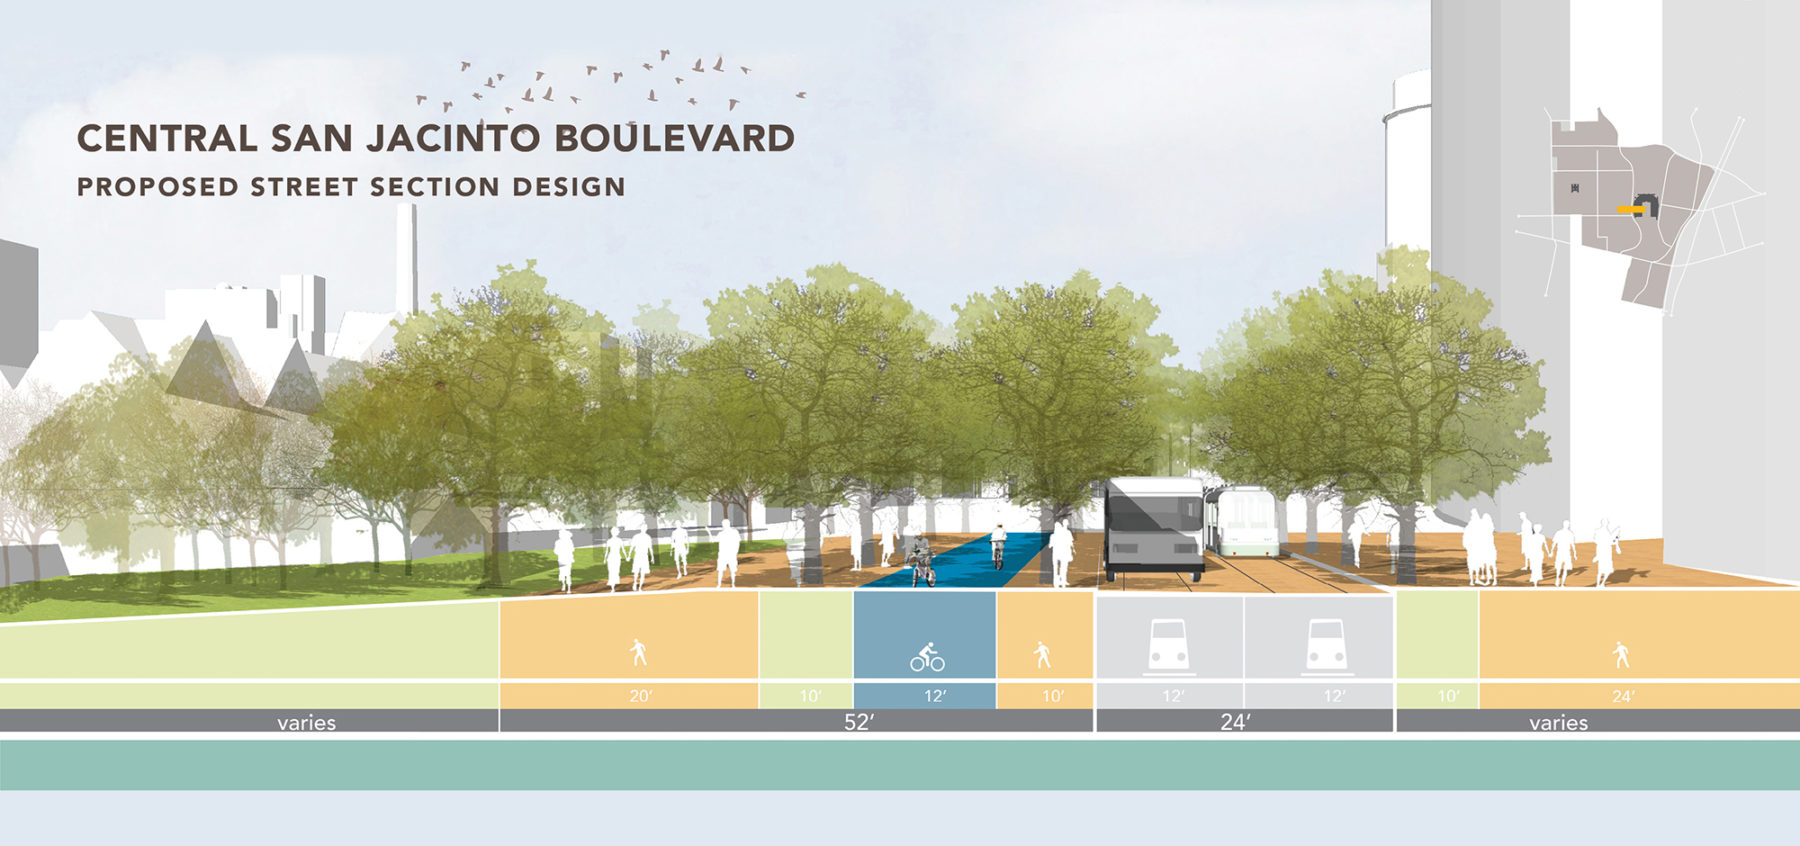 Street section of proposed design for Central San Jancinto Boulevard